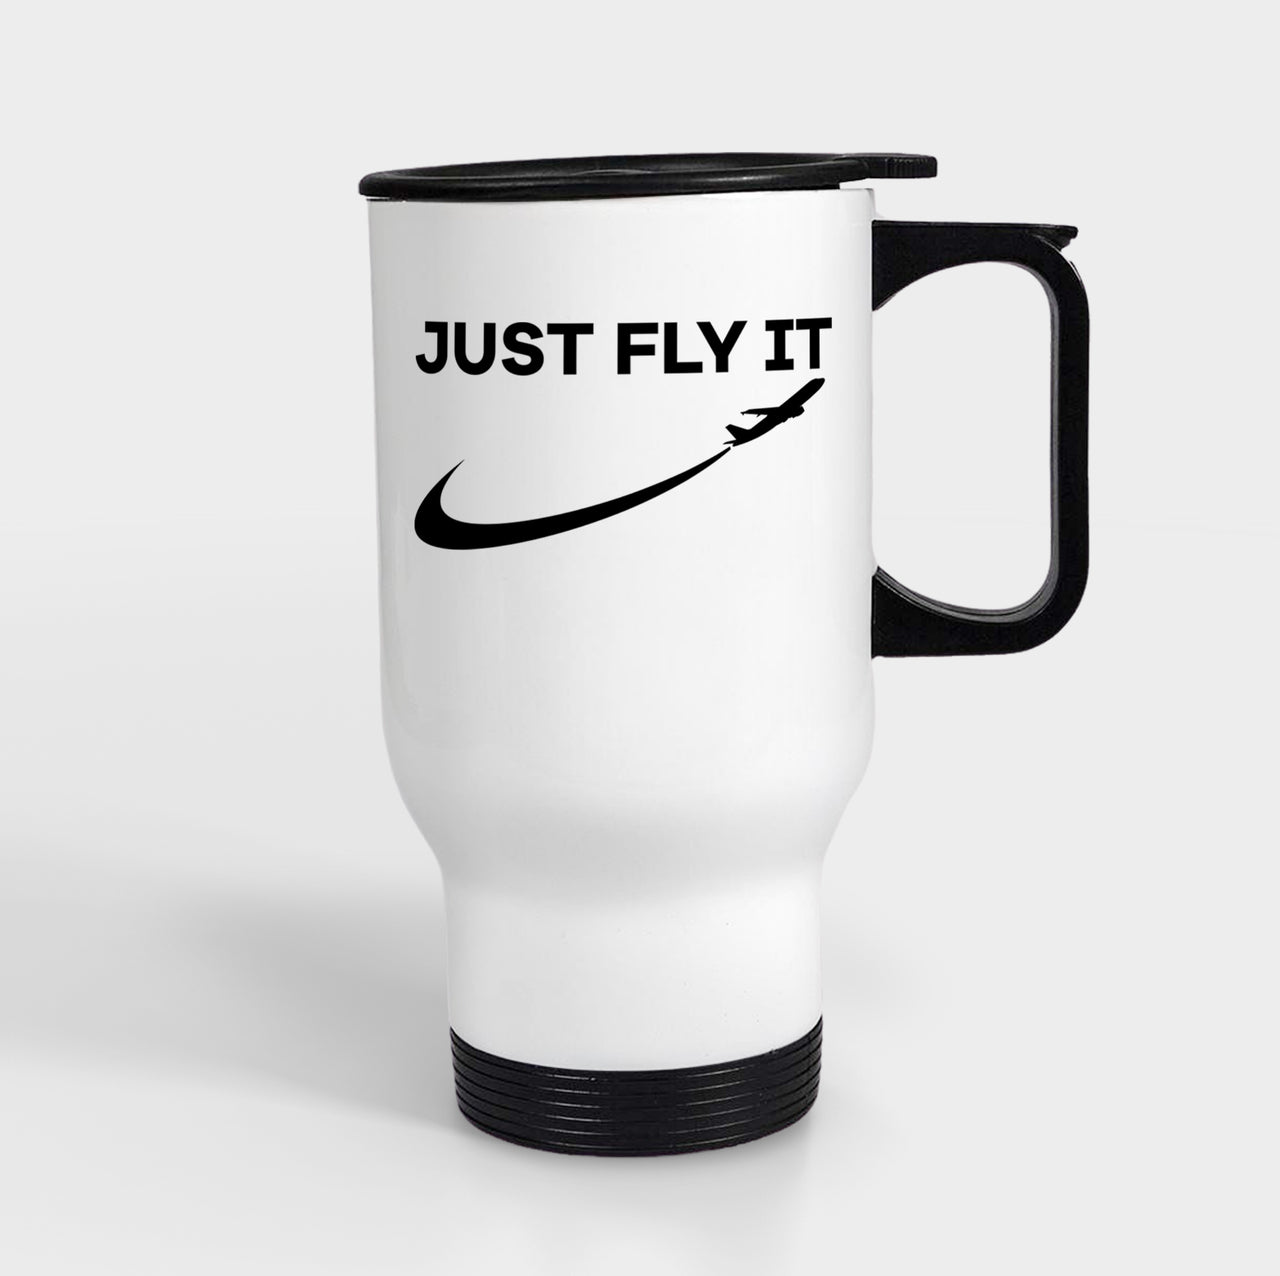 Just Fly It 2 Designed Travel Mugs (With Holder)